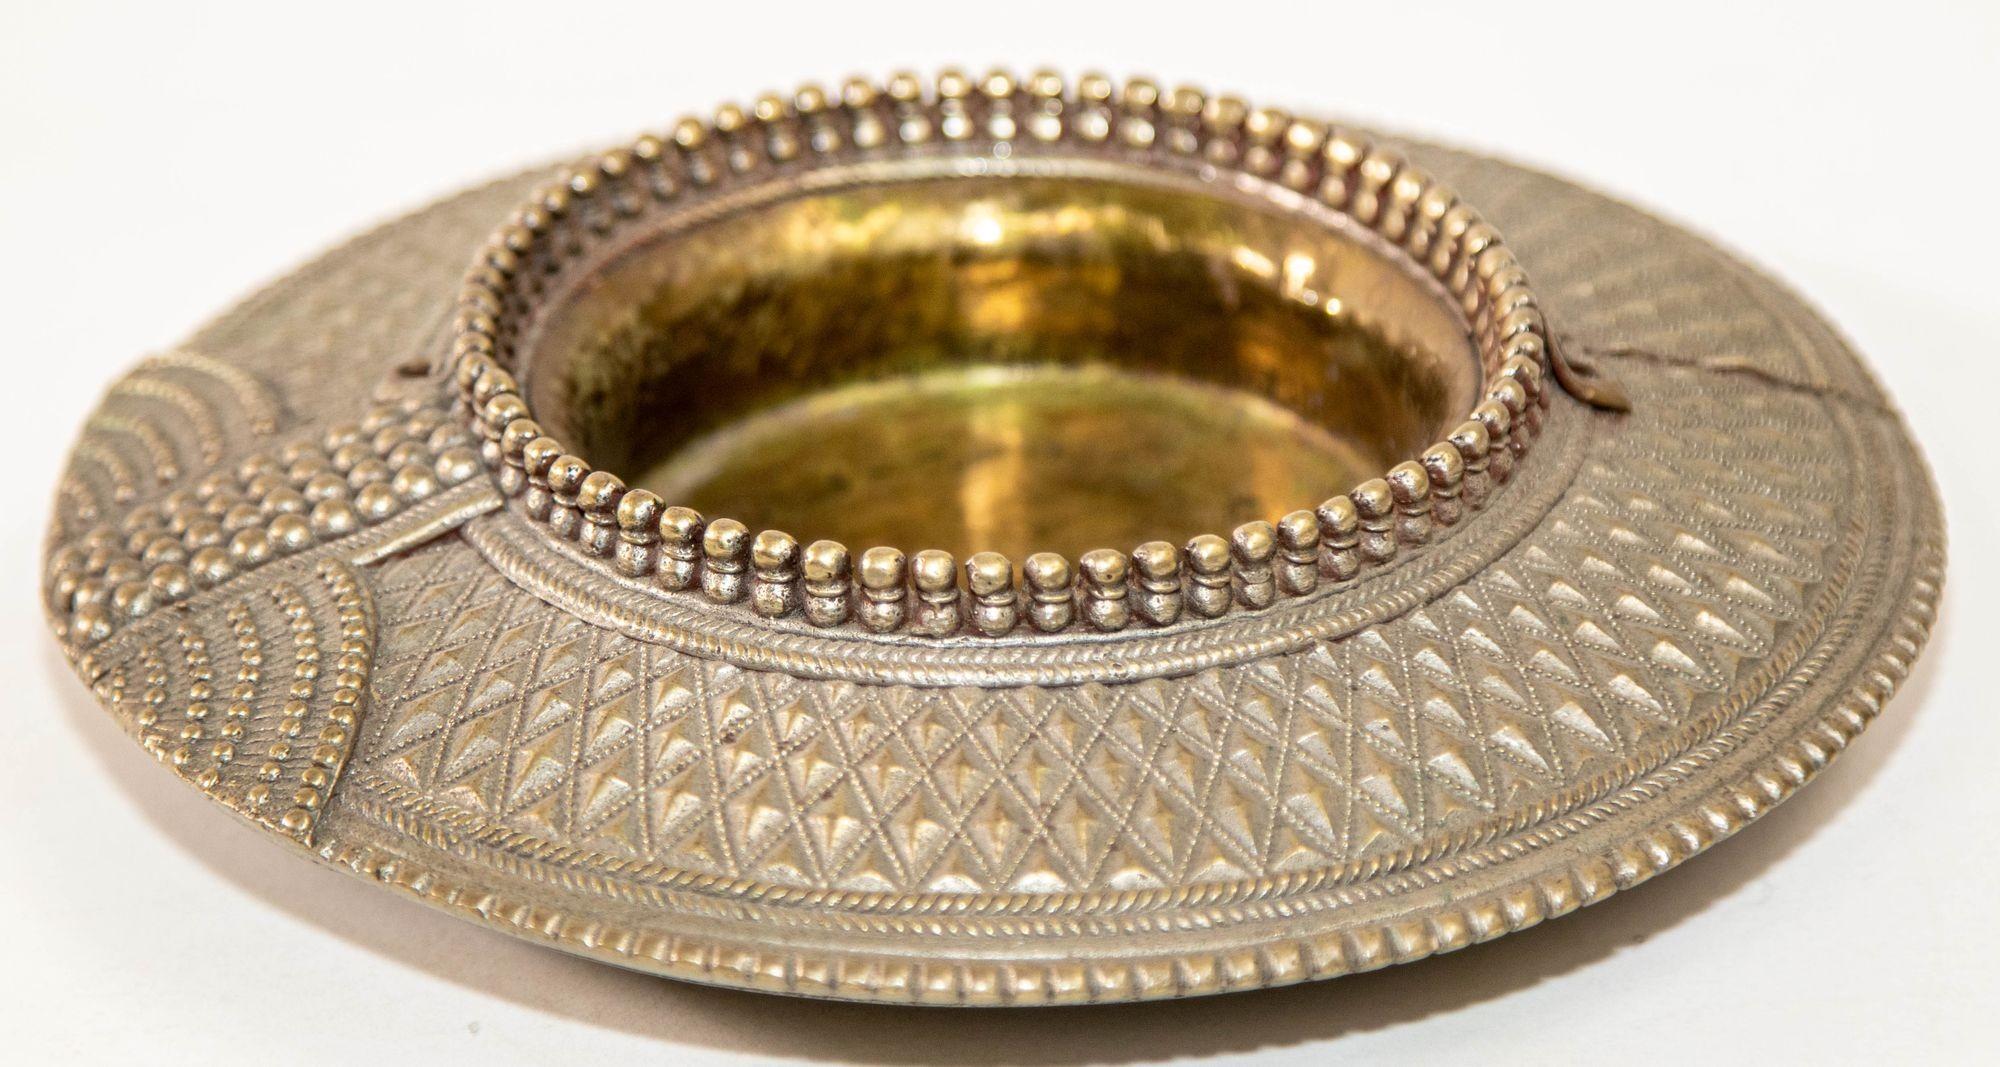 Fin du 19ème siècle Mughal Indian Raj Style Silvered Traditional Anklet Bracelet from India repurposed as a vide poche, catchall, bowl ashtray or just as a beautiful collectible decorative object from India.
Antique argent pièce et laiton lourd